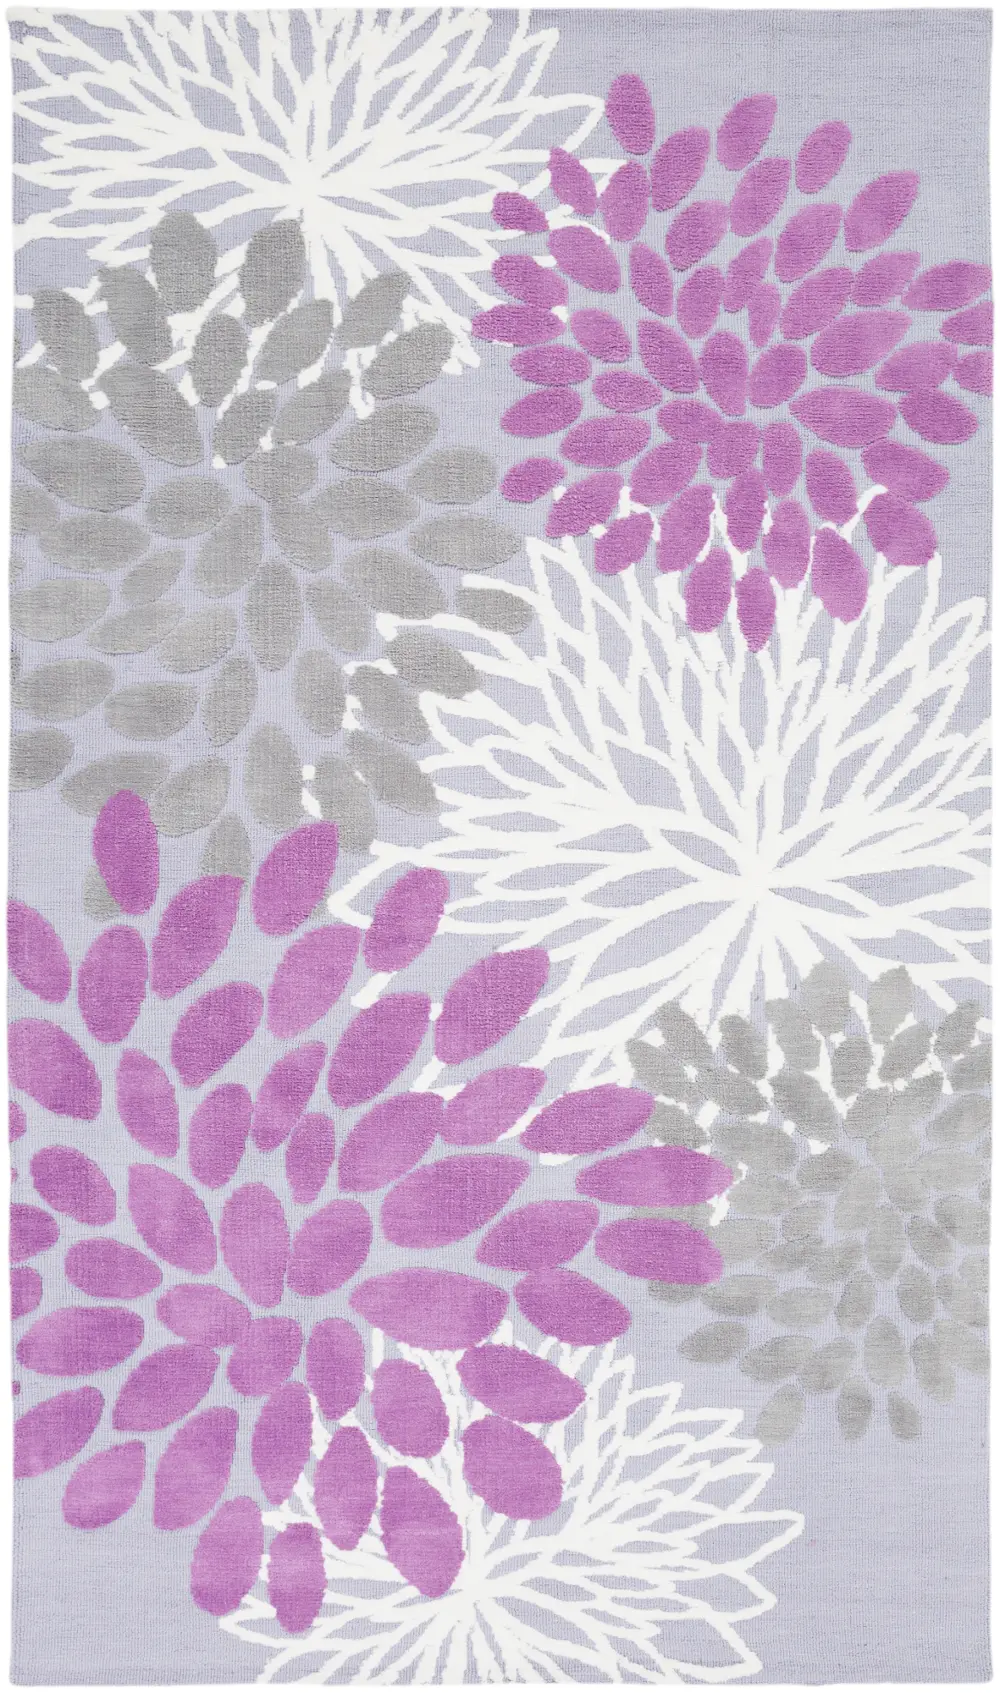 8 x 11 Large Floral Purple and Gray Kids Area Rug - Abigail-1